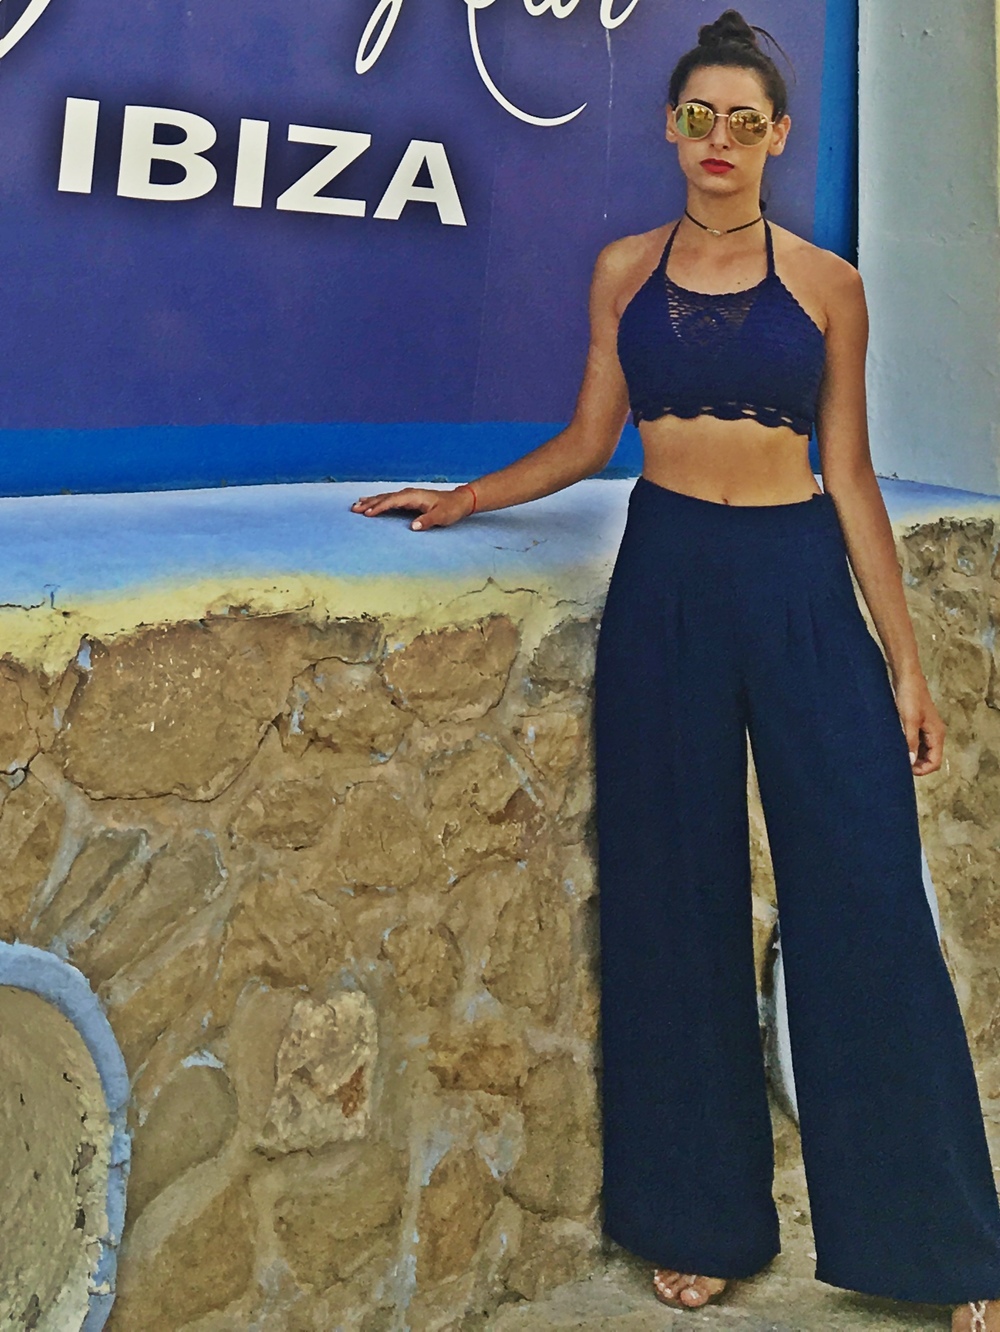 Wearing accessories from Topshop (necklace), Trousers from Primark and crop top from BoraBora Bikinis. 